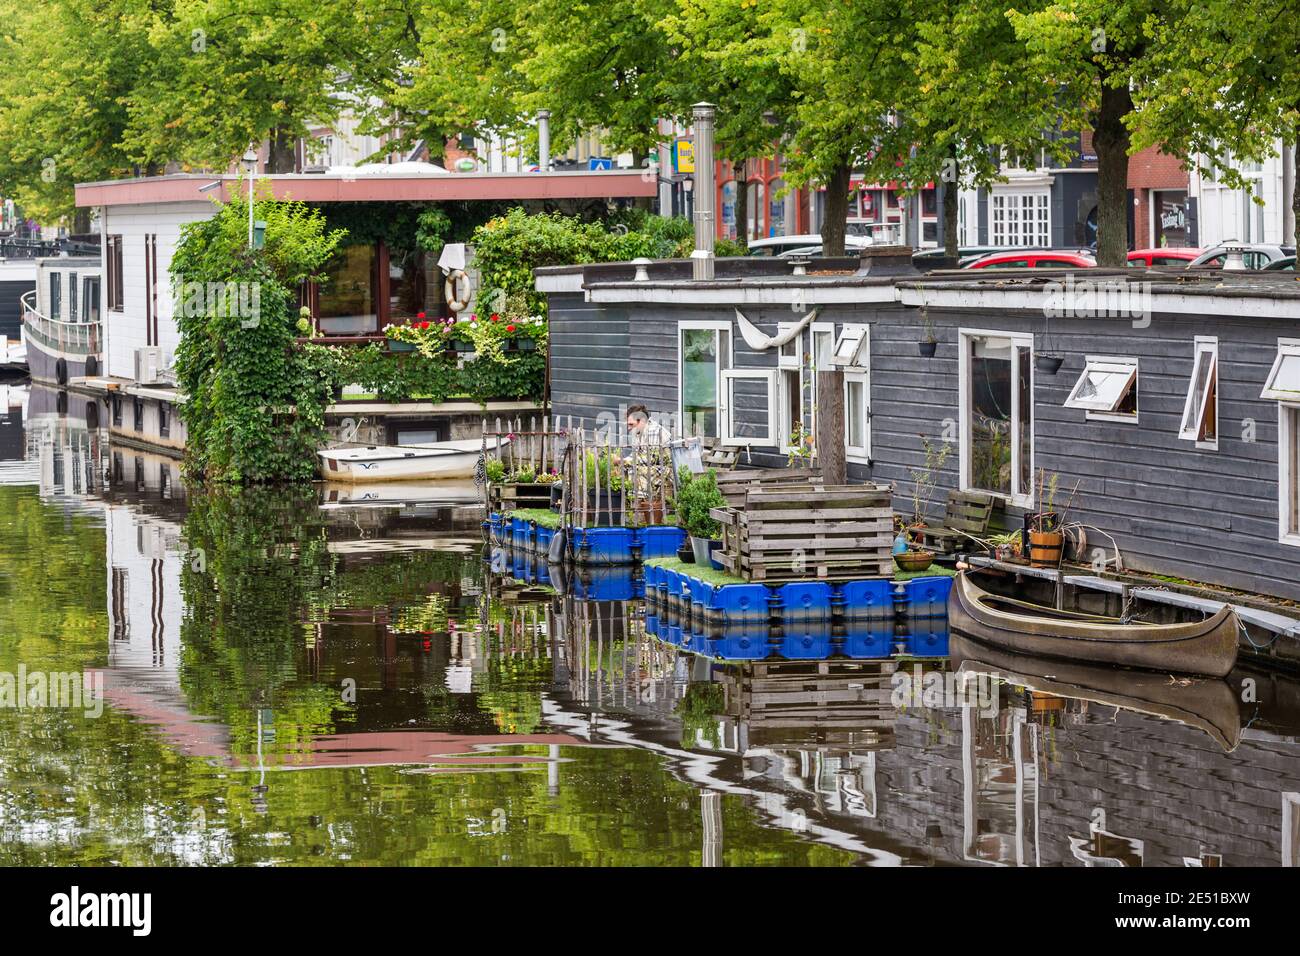 A row of house boats in Groningen, lined in a canal under luxuriant green trees Stock Photo